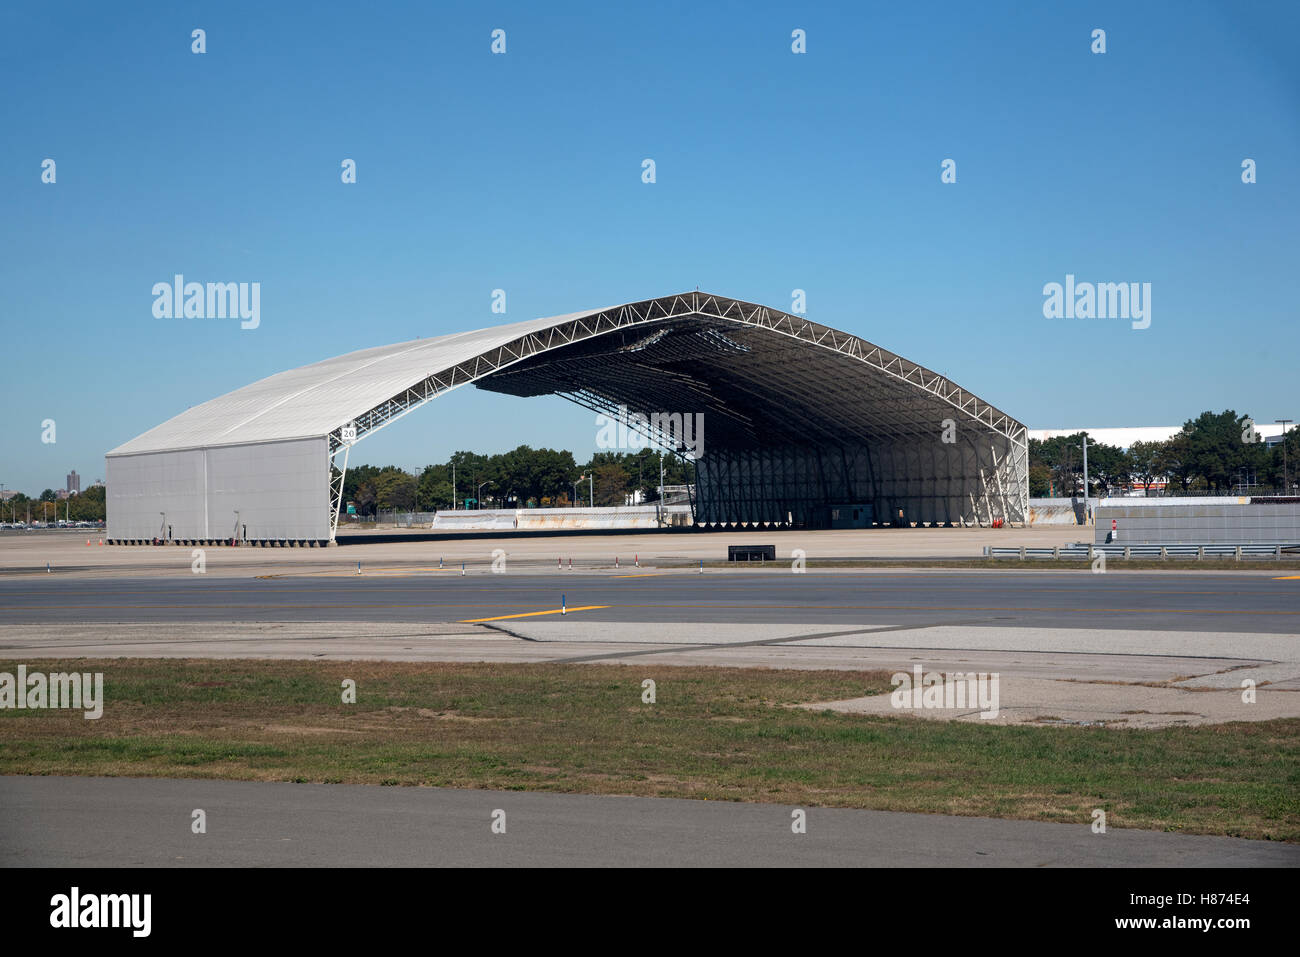 Deicing facility hanger New York USA - October 2016 - A radiant deicing area for aircraft at JFK airport Stock Photo